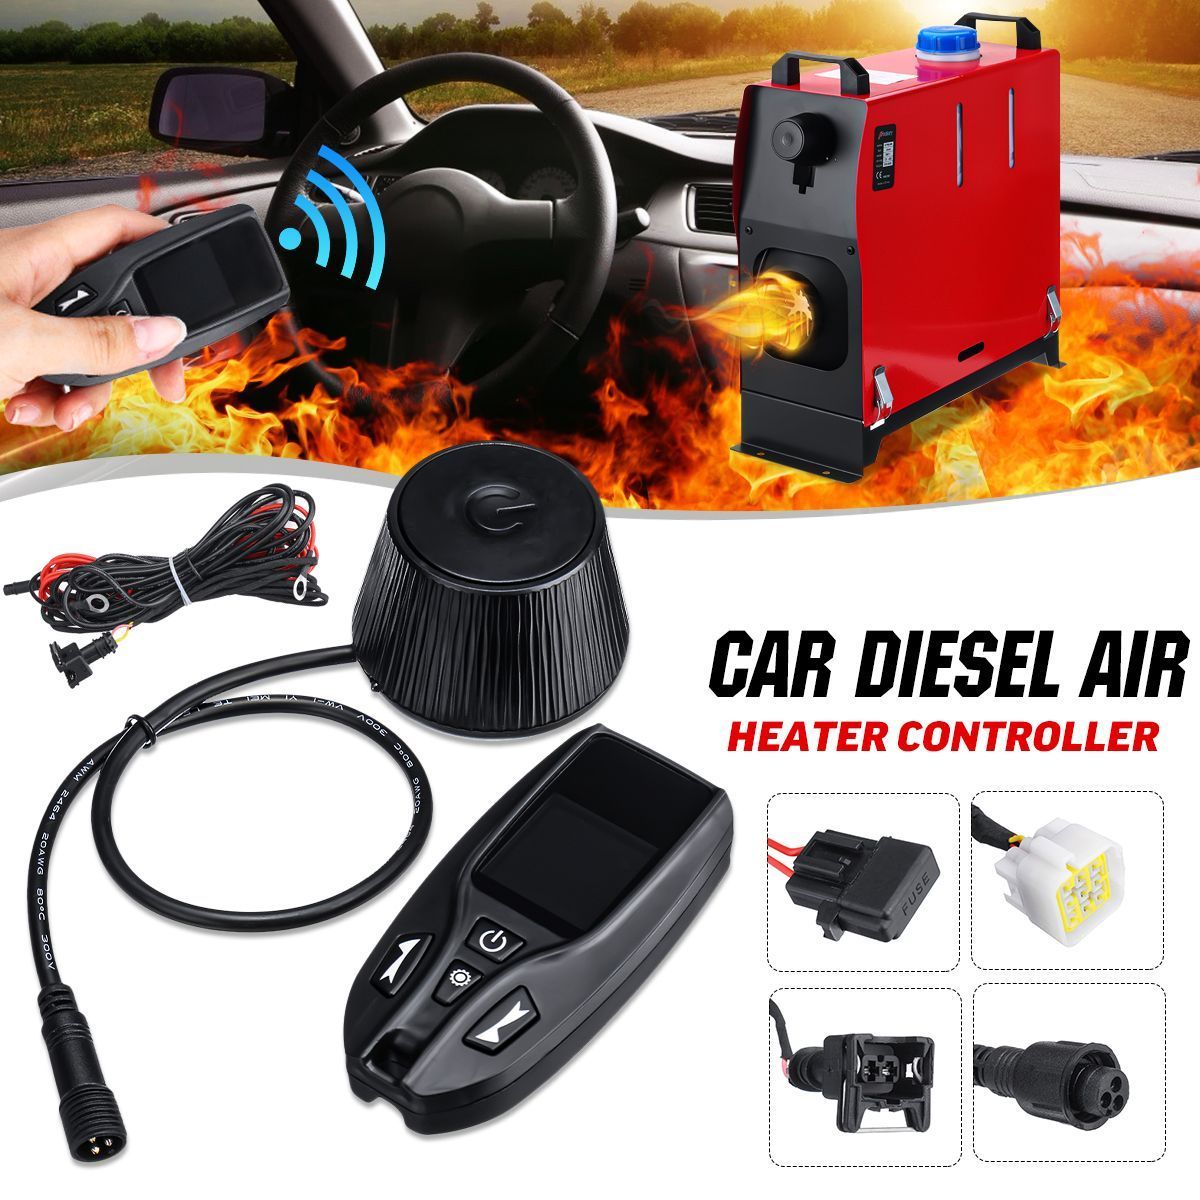 12V-24V-Two-way-remote-control-Car-Diesel-Air-Heater-LCD-Monitor-Switch-Parking-Heater-Controller-1604281